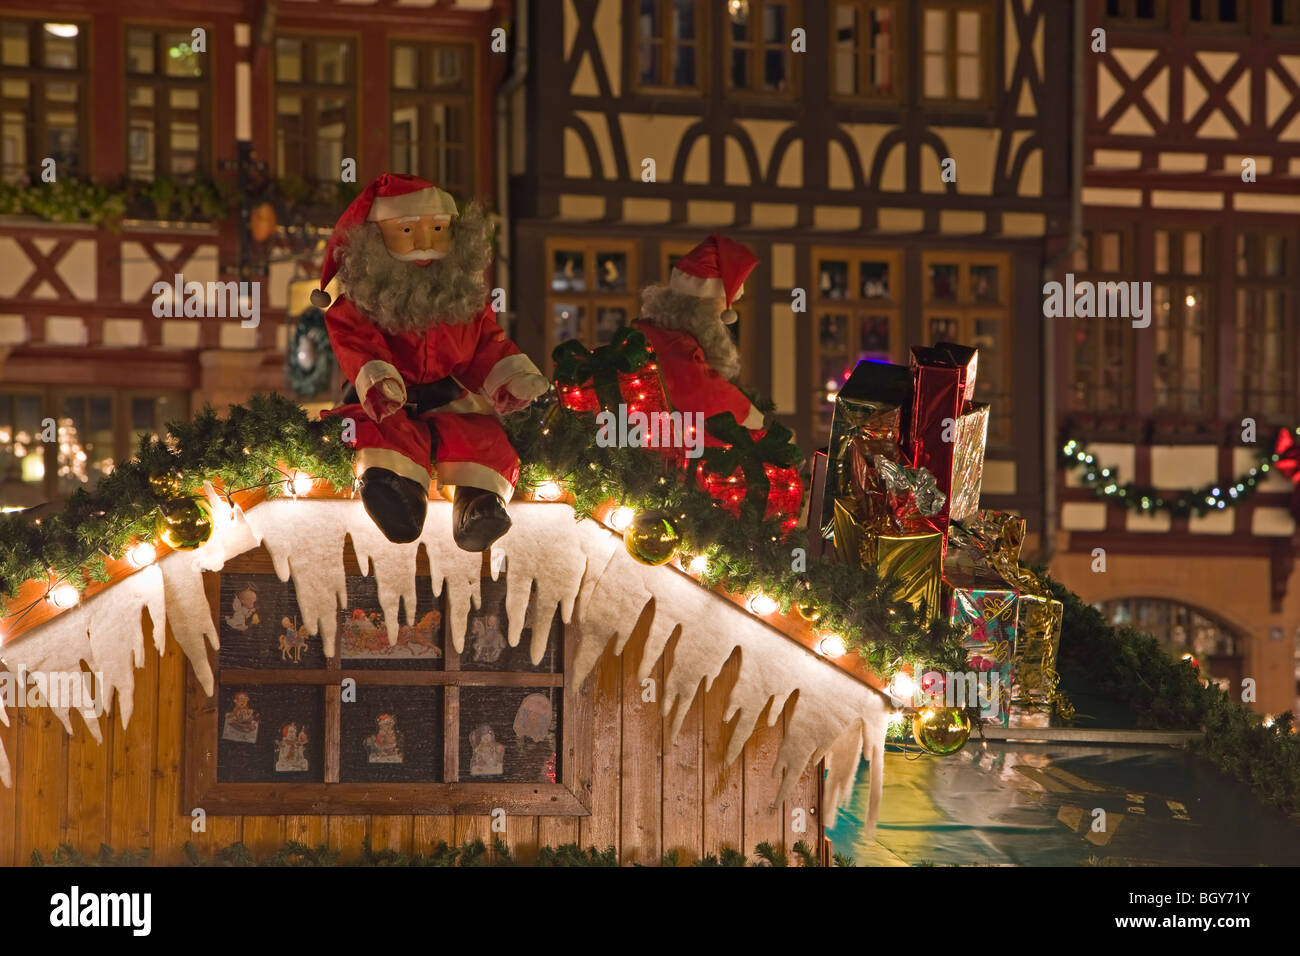 Santas Claus on the roof of a decorated Christkindlmarkt (Christmas Market) stall set up in front of buildings in the Römerberg  Stock Photo